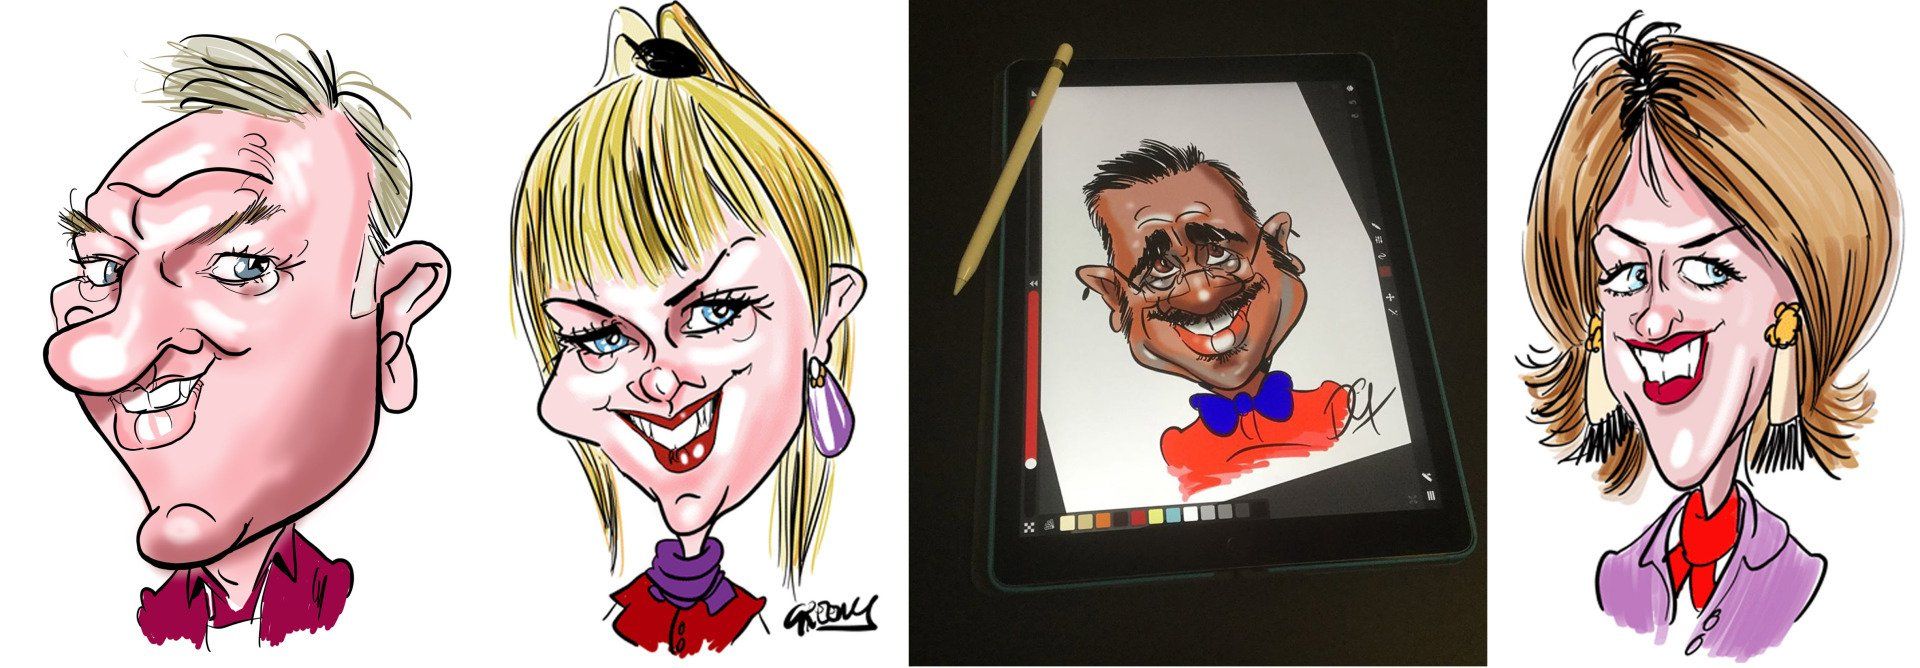 Digital live caricatures on the ipad printed by david Gree